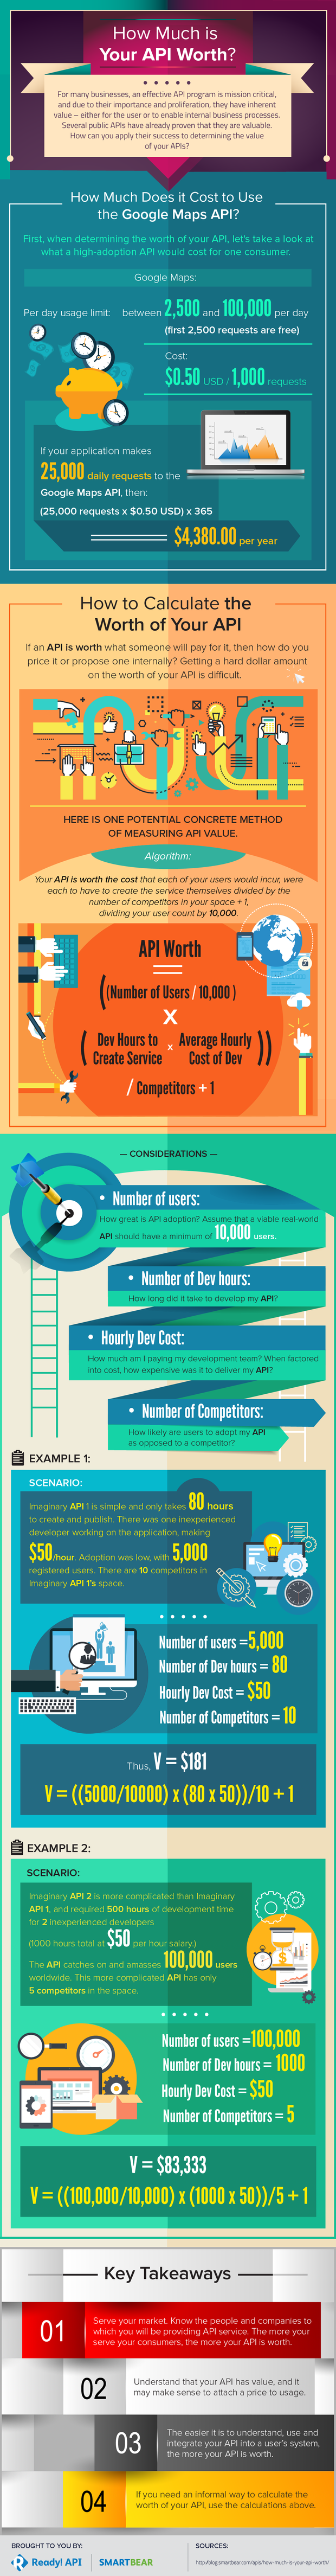 how much is your api worth infographic2